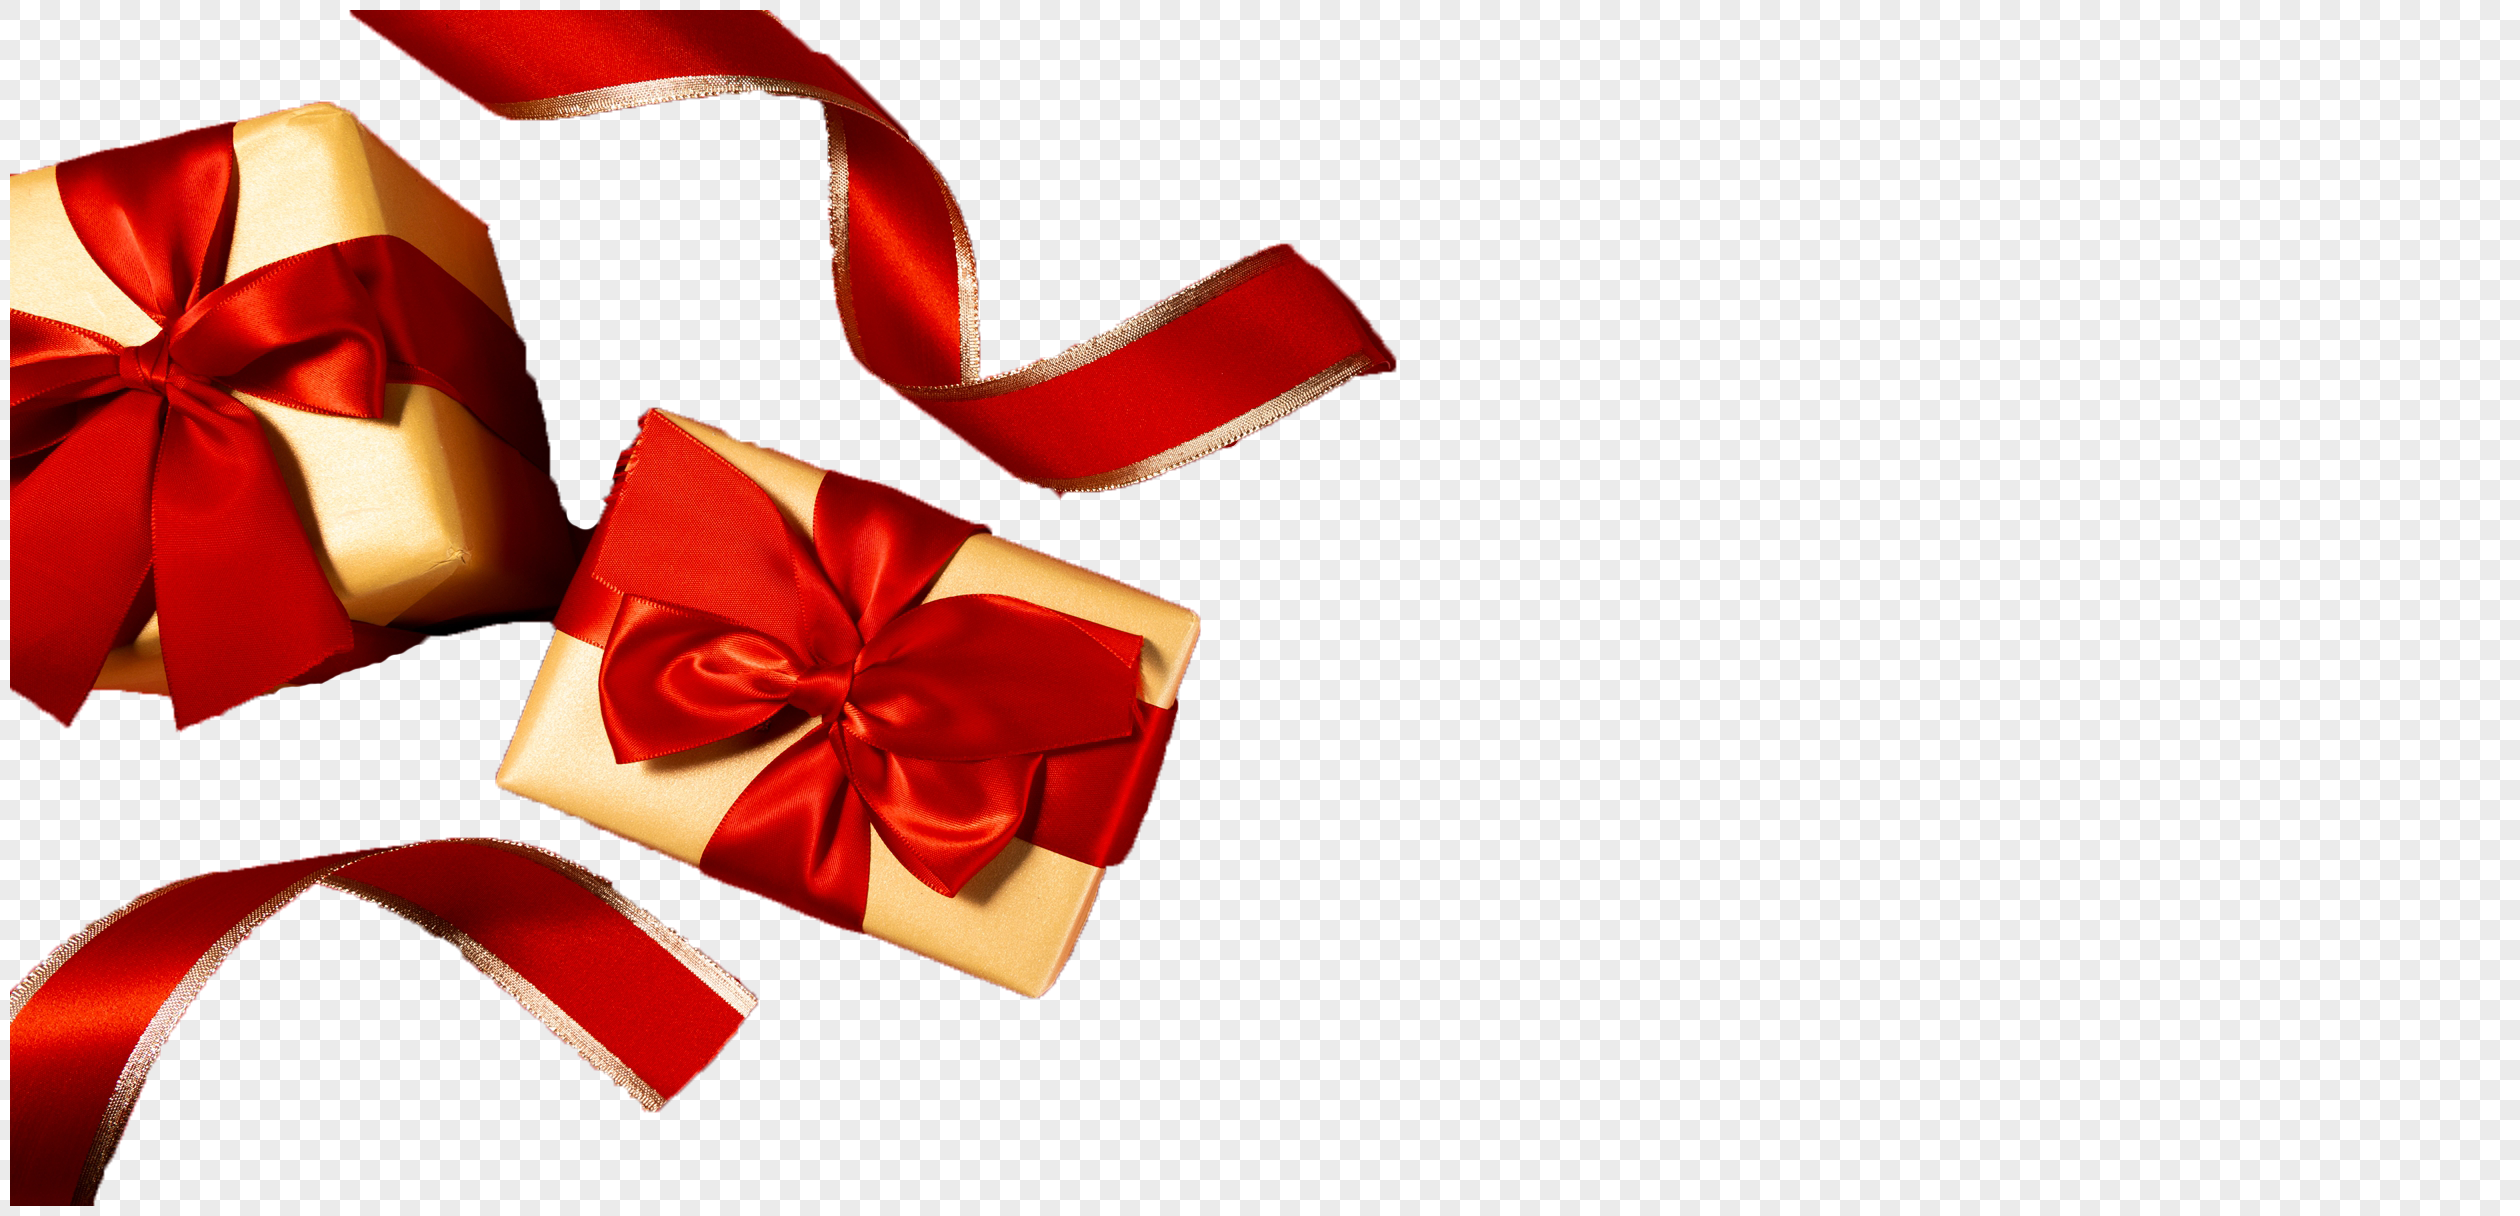 Gift card with ribbon and satin red bow on tranparent background PNG.png -  Similar PNG